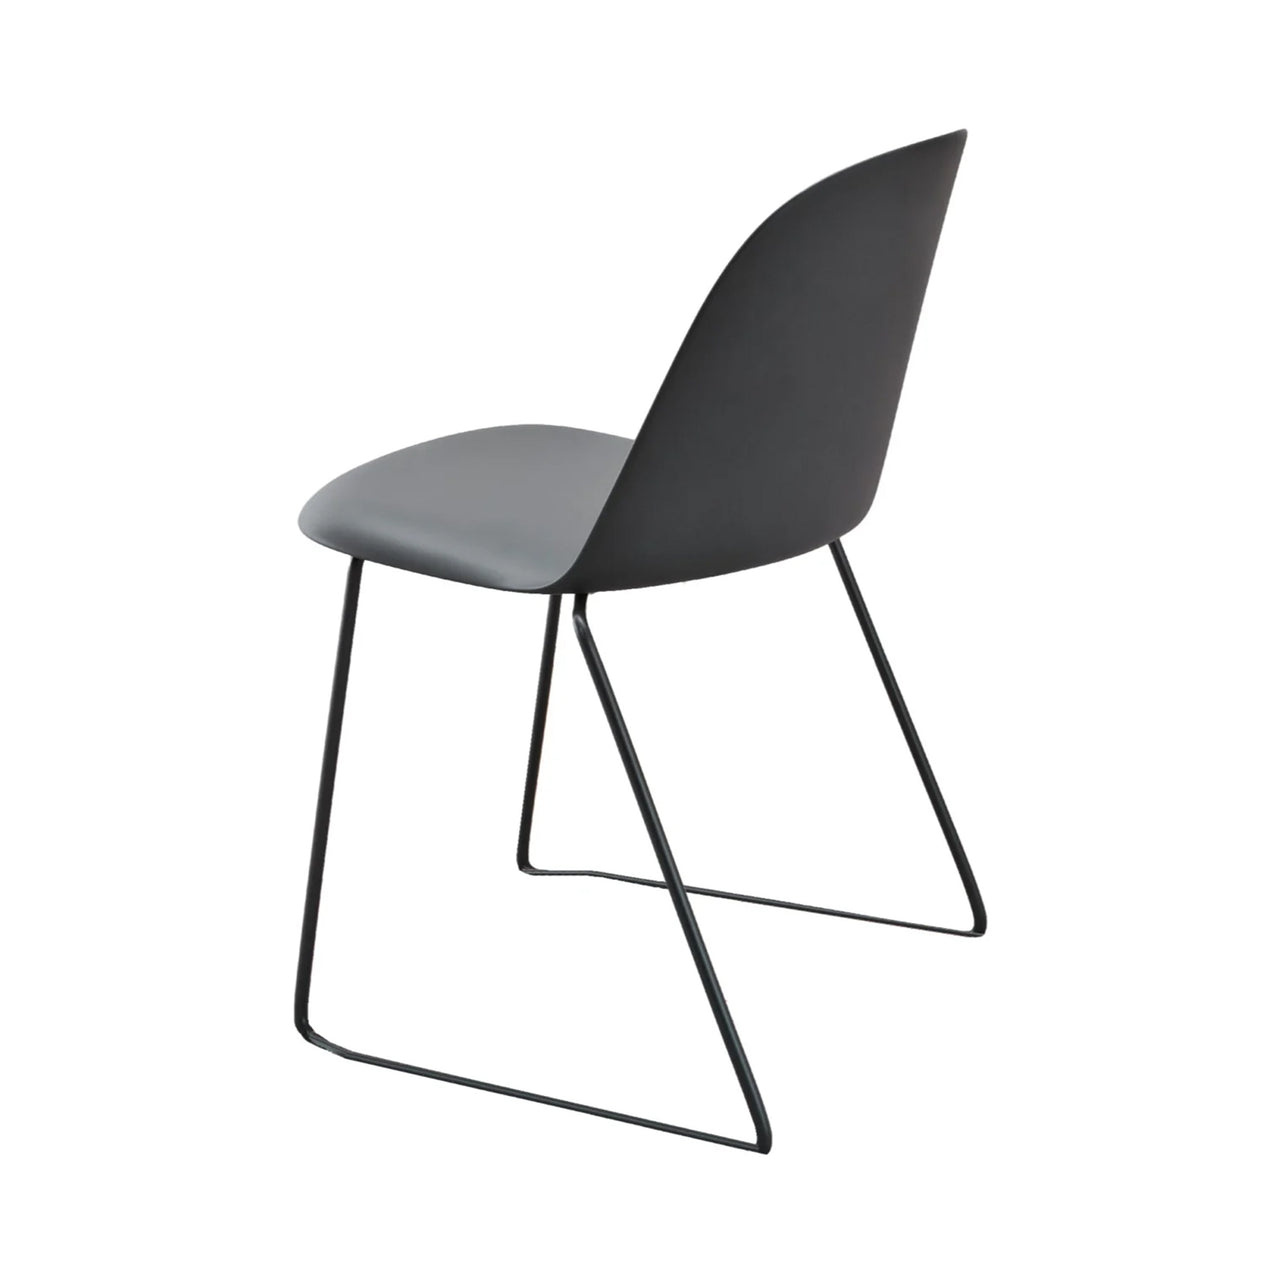 Mariolina Side Chair: Sledge Base + Lacquered Anthracite + Anthracite